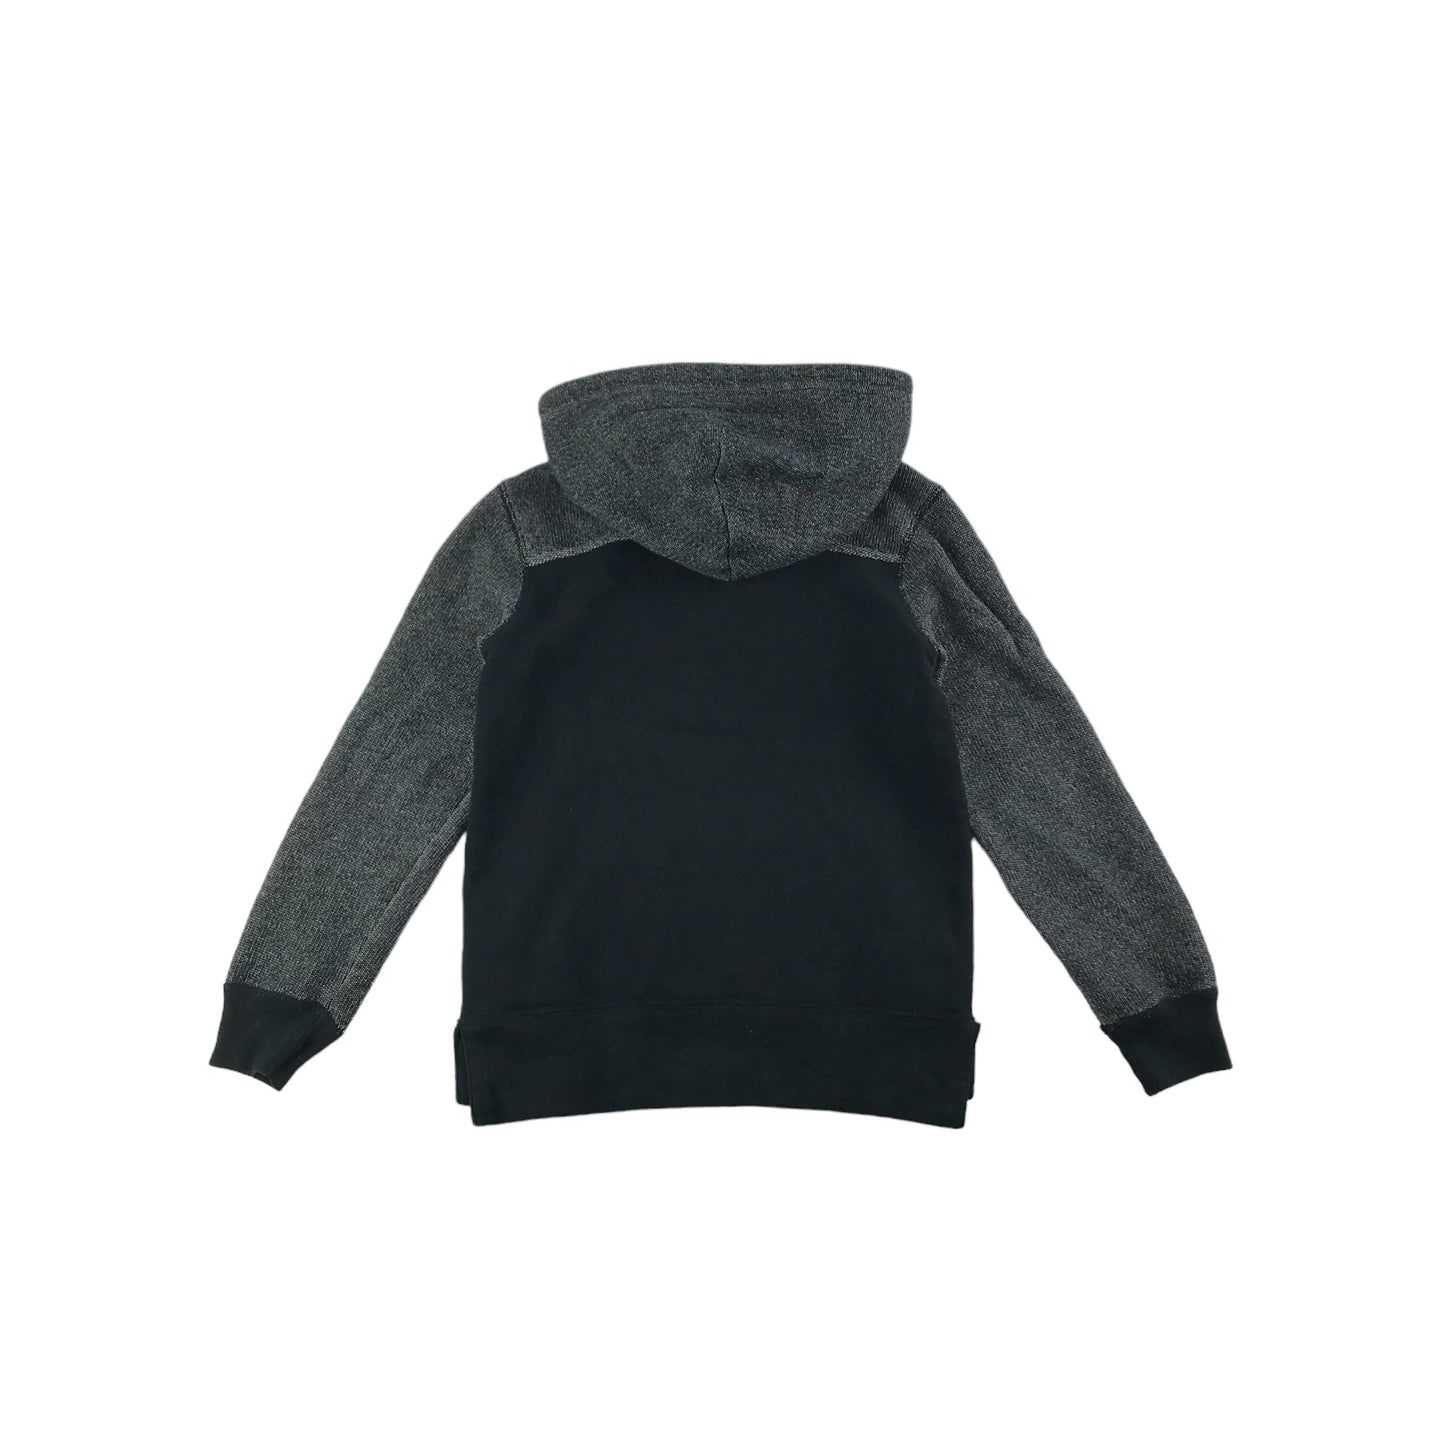 Abercrombie Hoodie Age 7 Black and Grey Panelled Pullover with button up neck